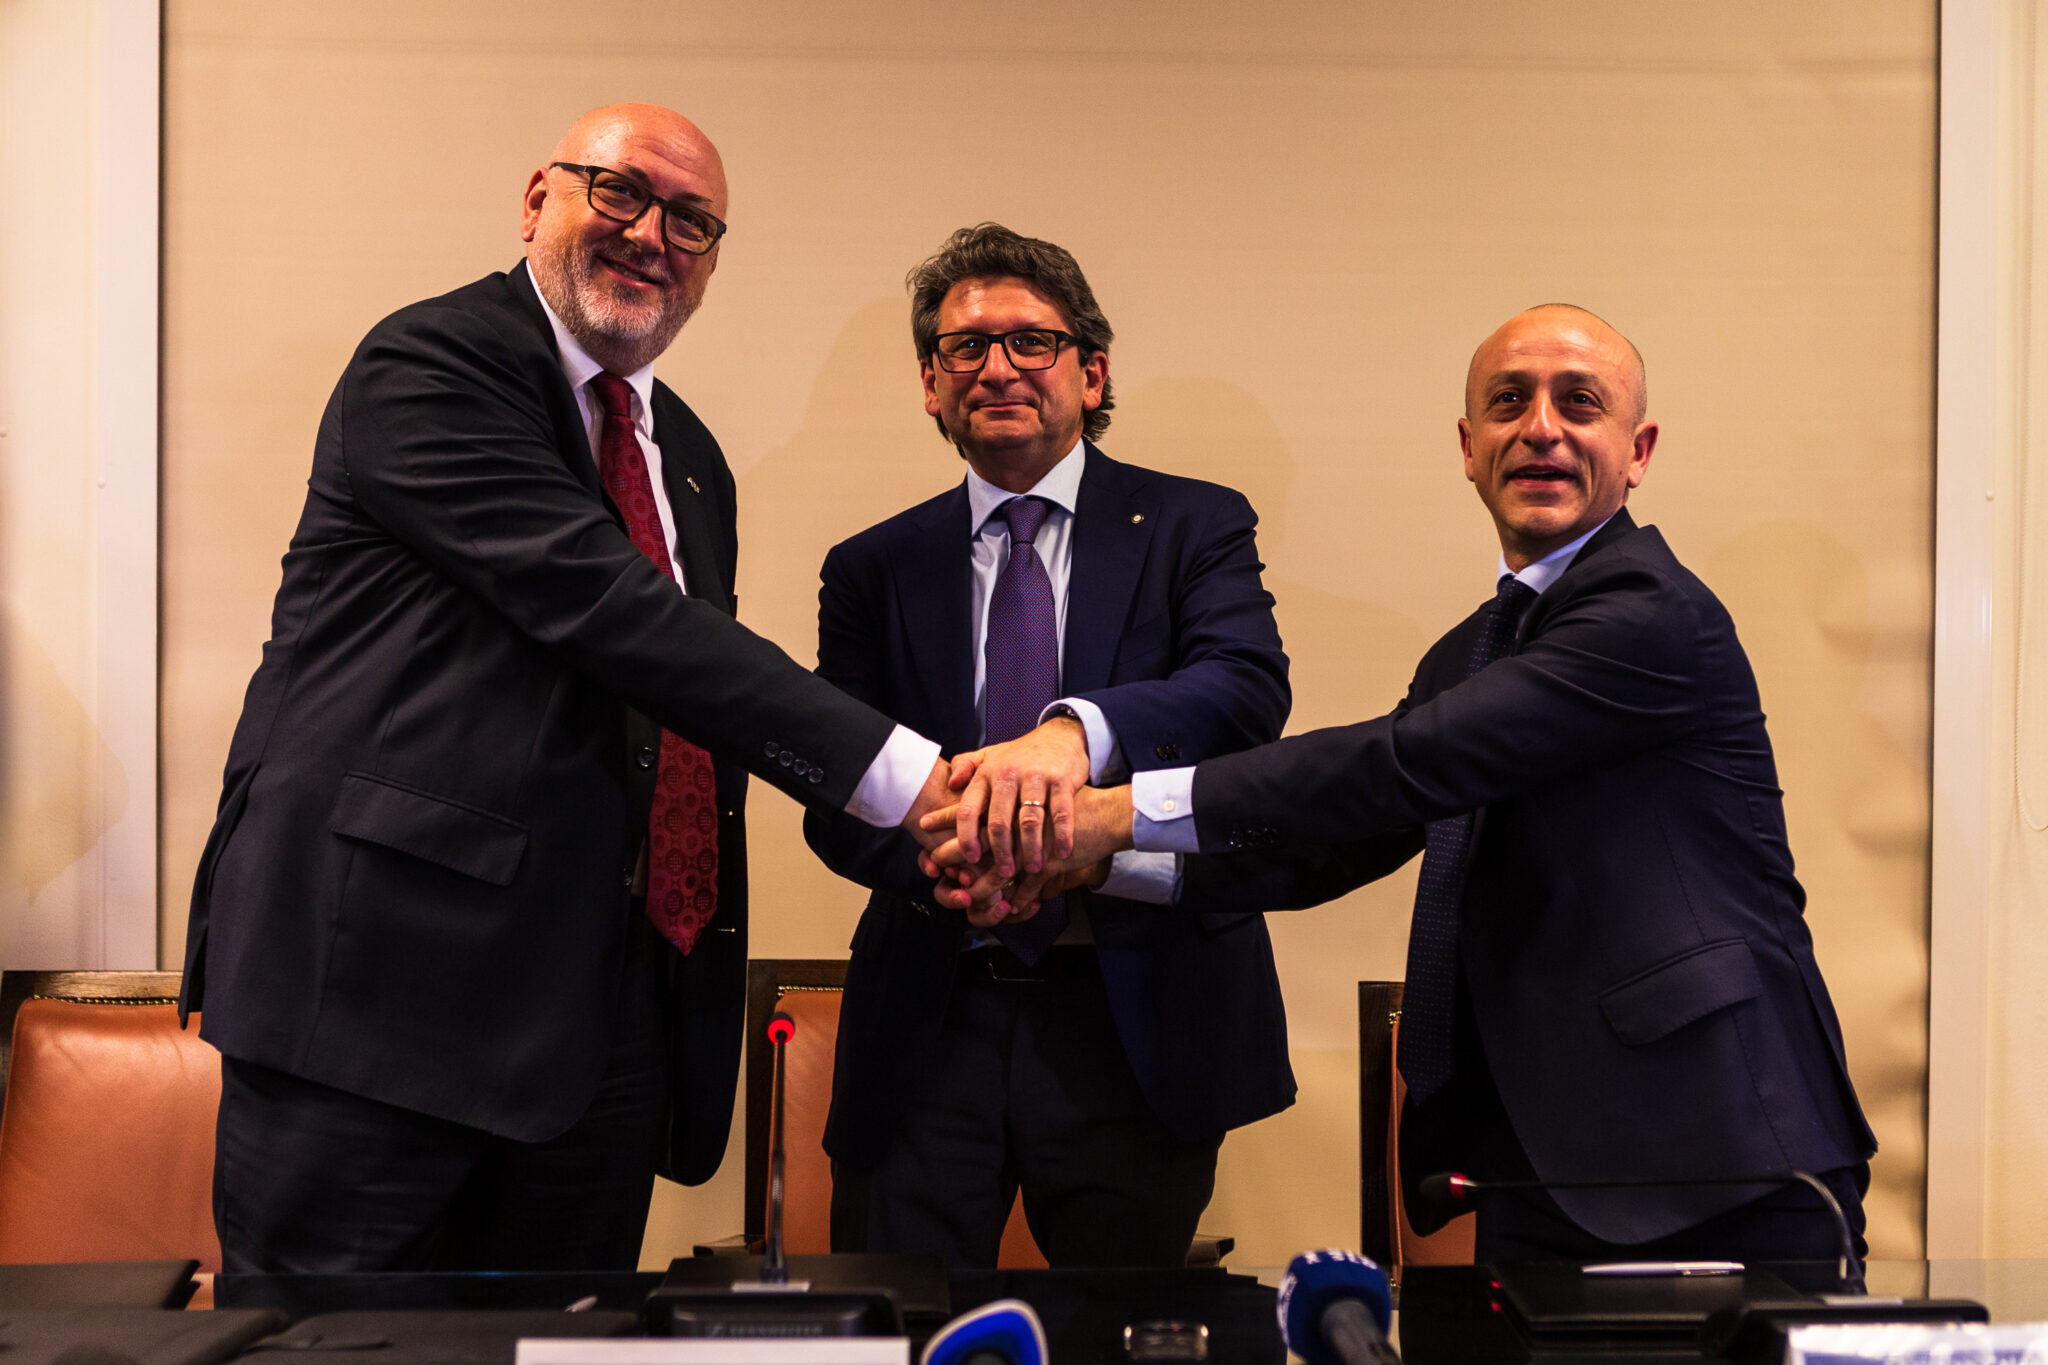 The port of Trieste signs two memorandums of understanding for developing rail links to East-Central Europe